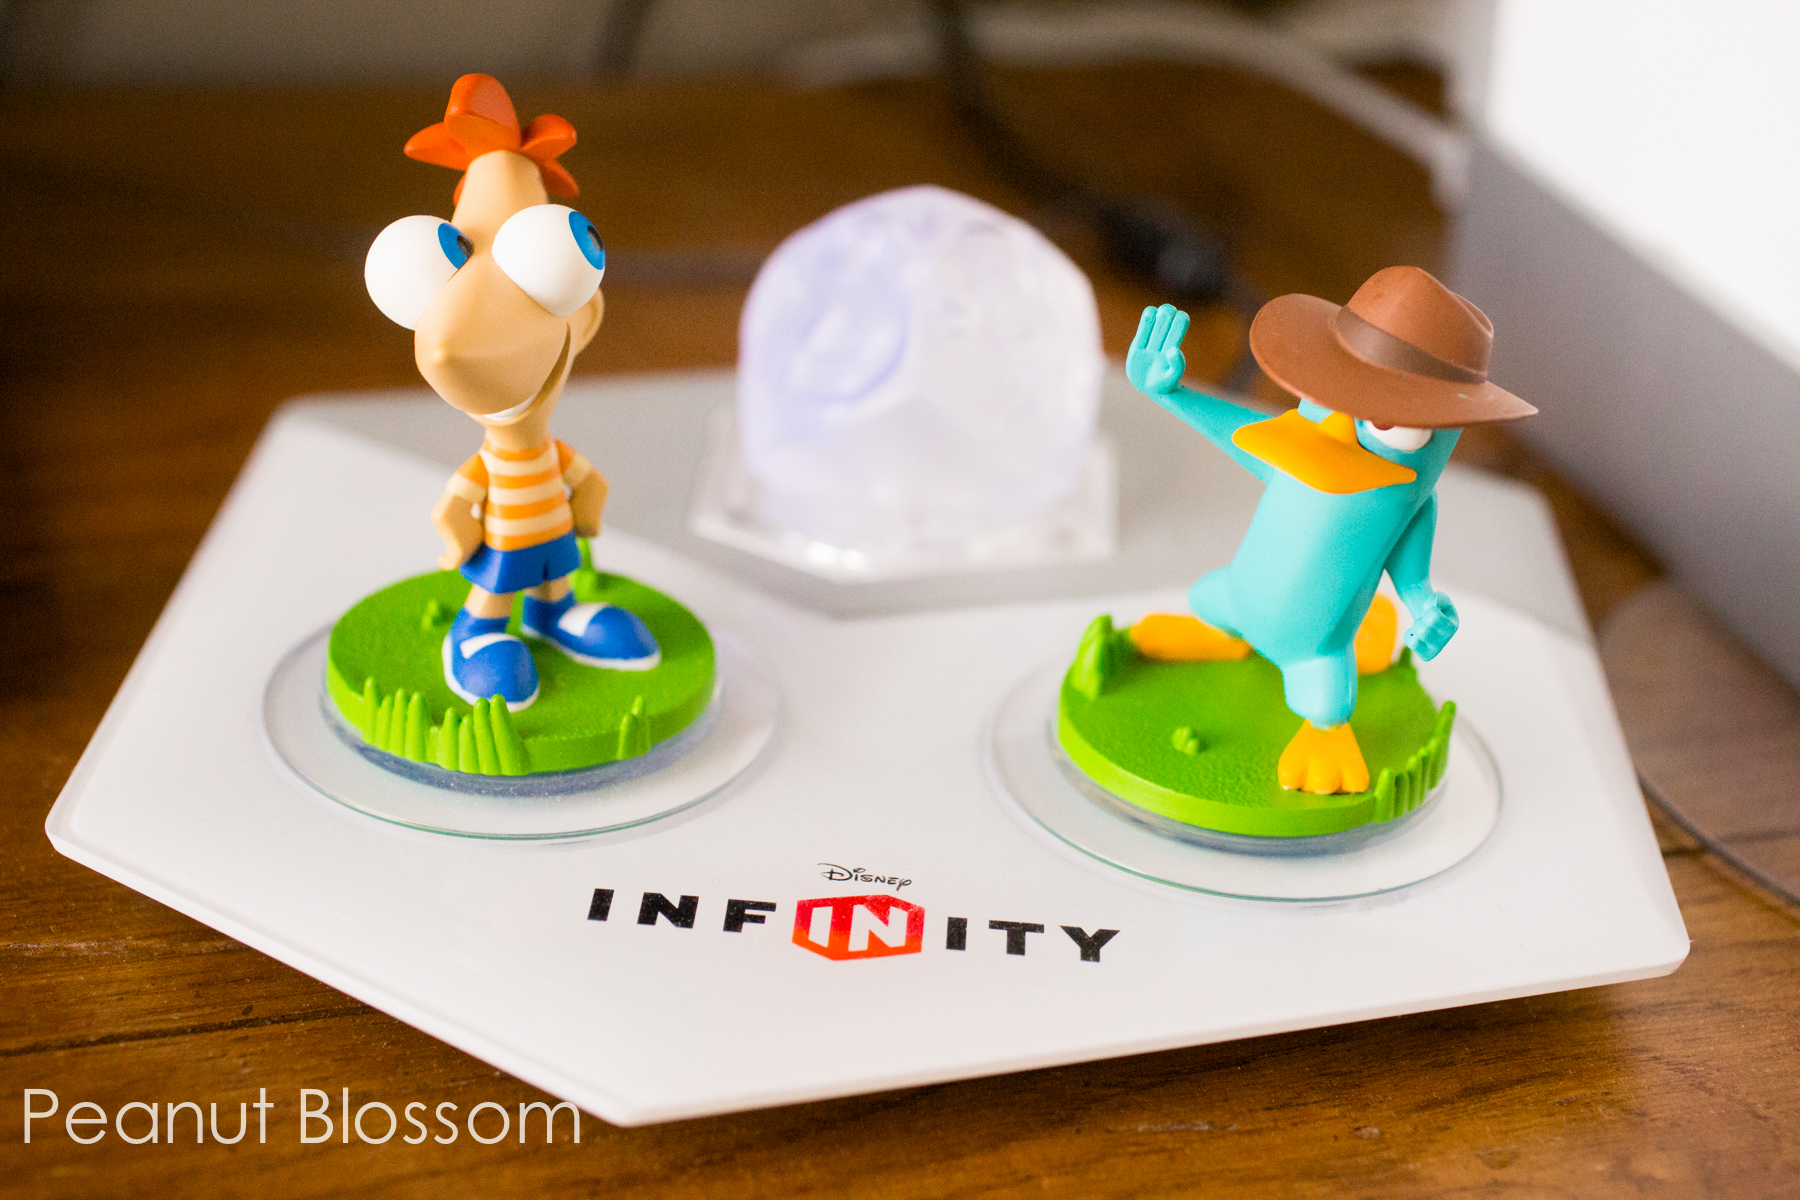 Notes from Mom: A Disney Infinity parents guide